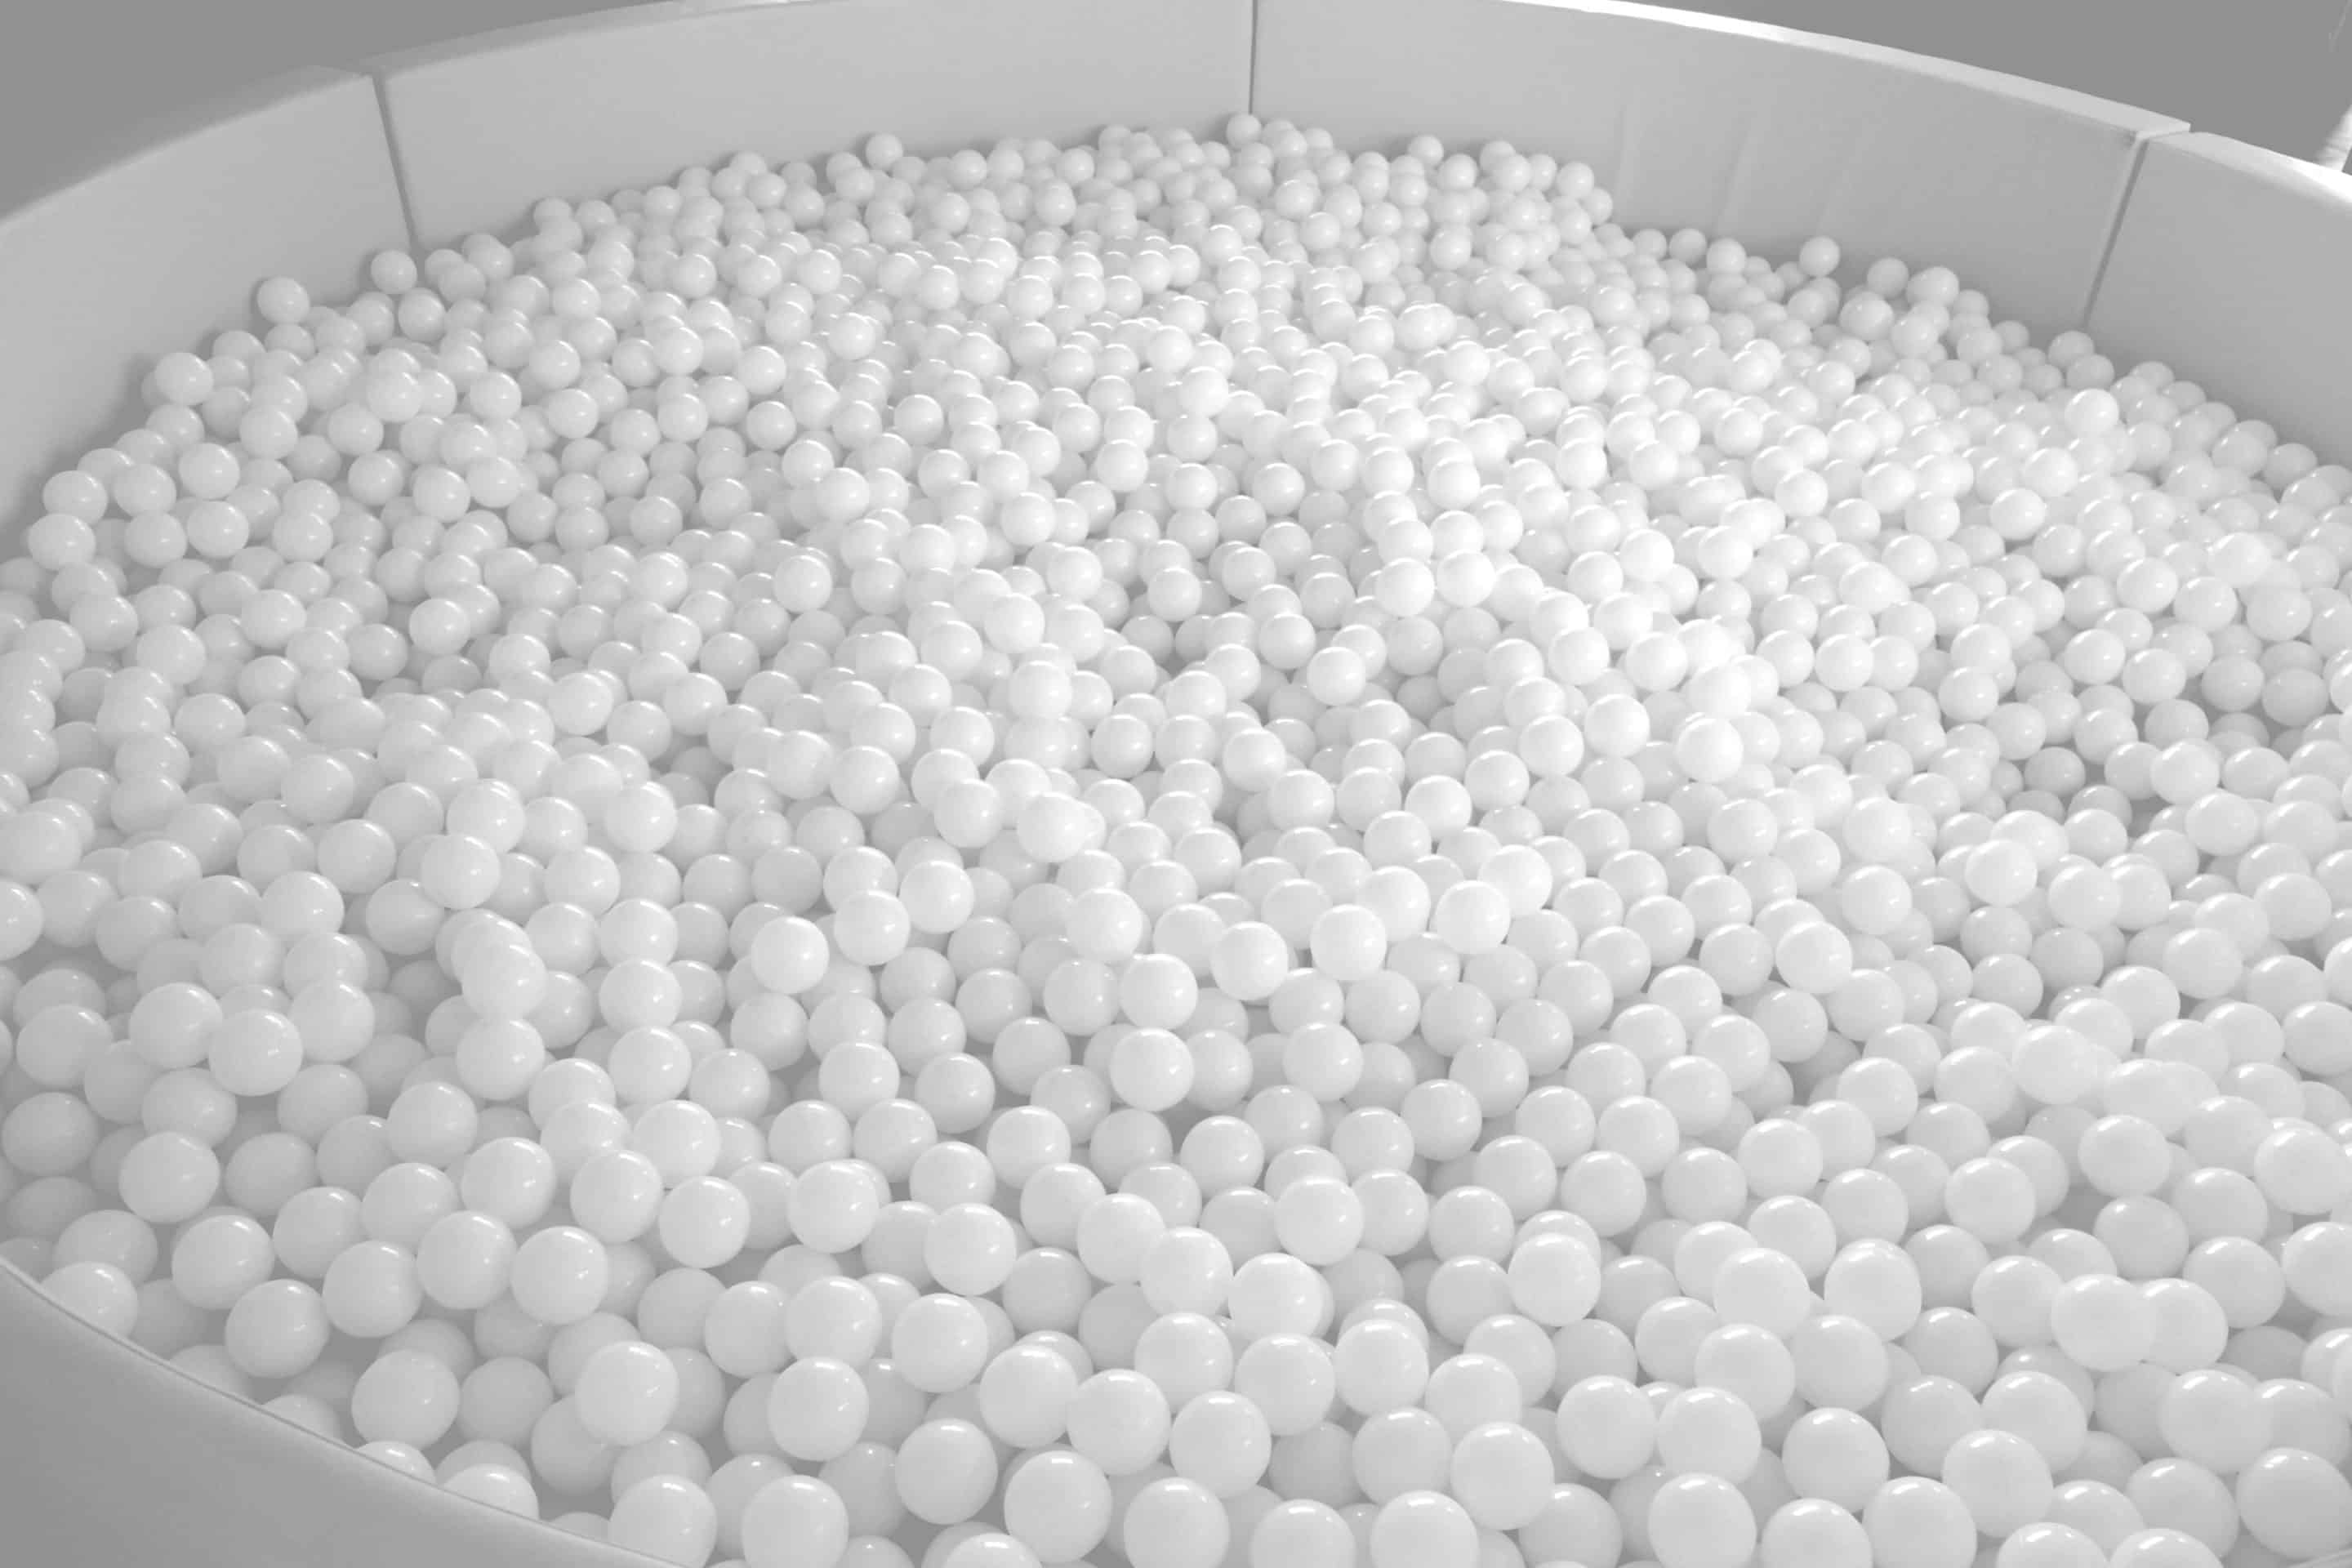 Ahiring Ball Pit Jumping Castle Hire